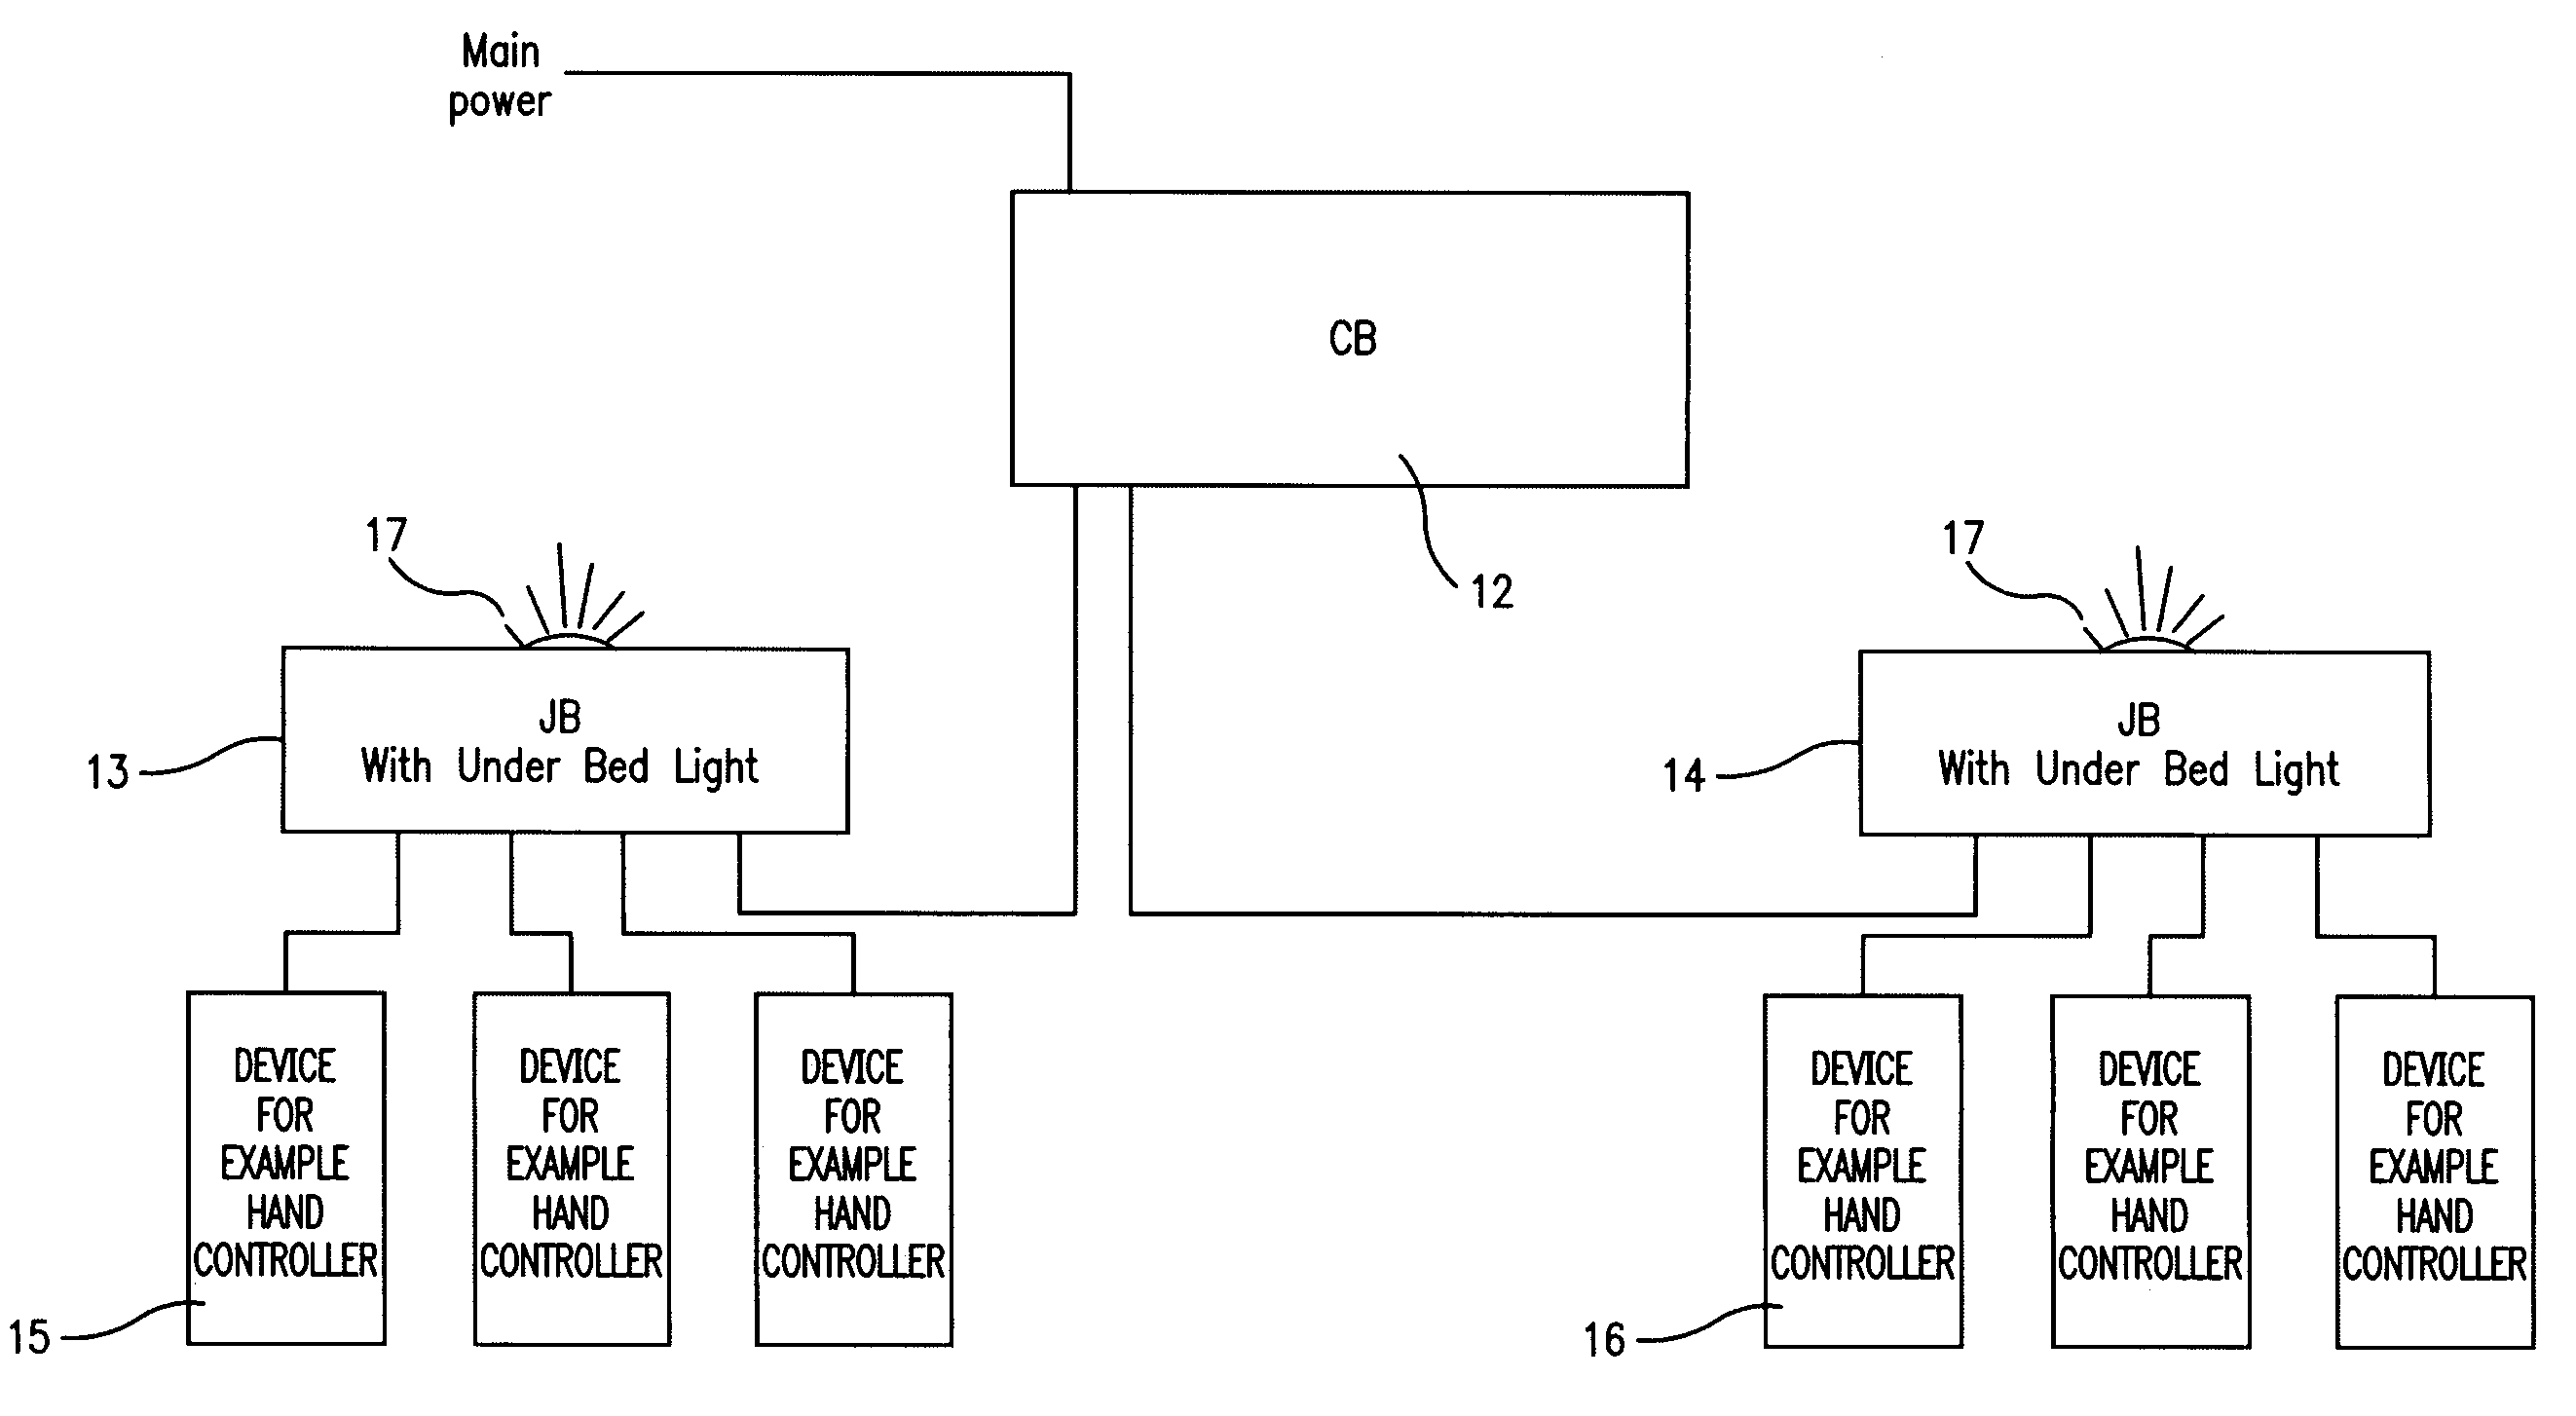 Electrical actuator system for articles of furniture